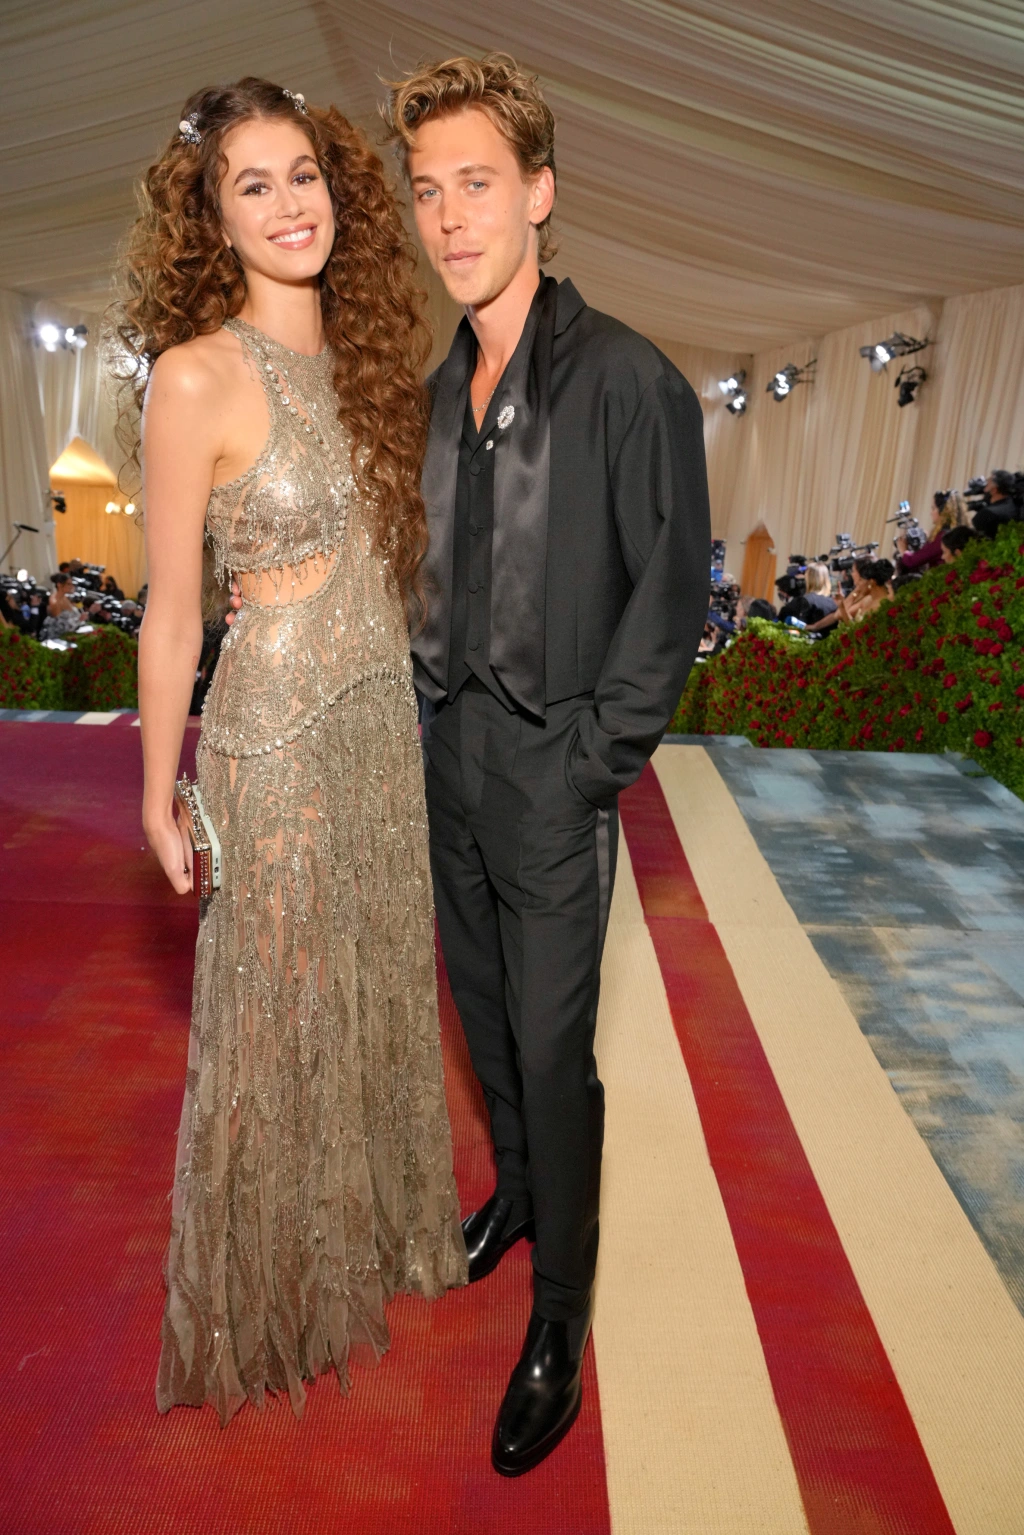 Austin Butler with his girlfriend, Kaia Gerber at the 2022 Met Gala